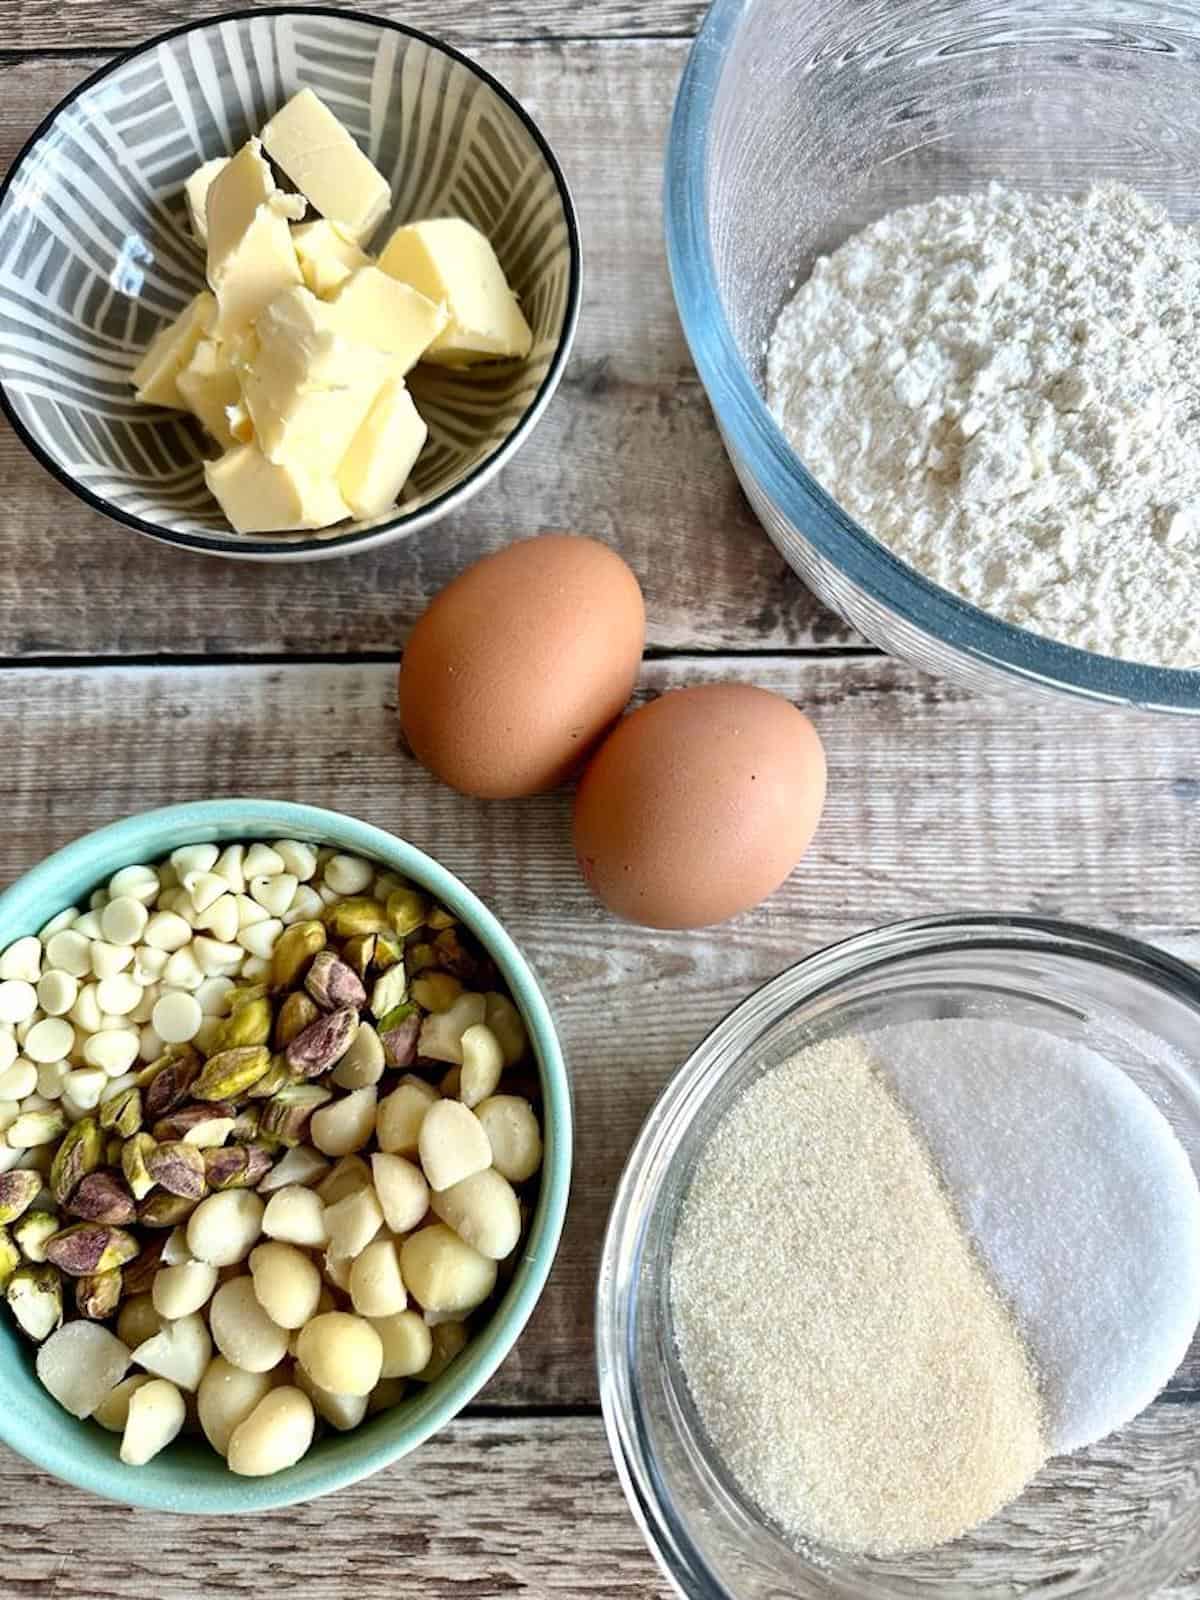 Cookie ingredients in bowls on a table. Butter, flour, eggs, baking powder, baking soda, brown sugar, white sugar, white chocolate chips, pistachio nuts and macadamia nuts. 